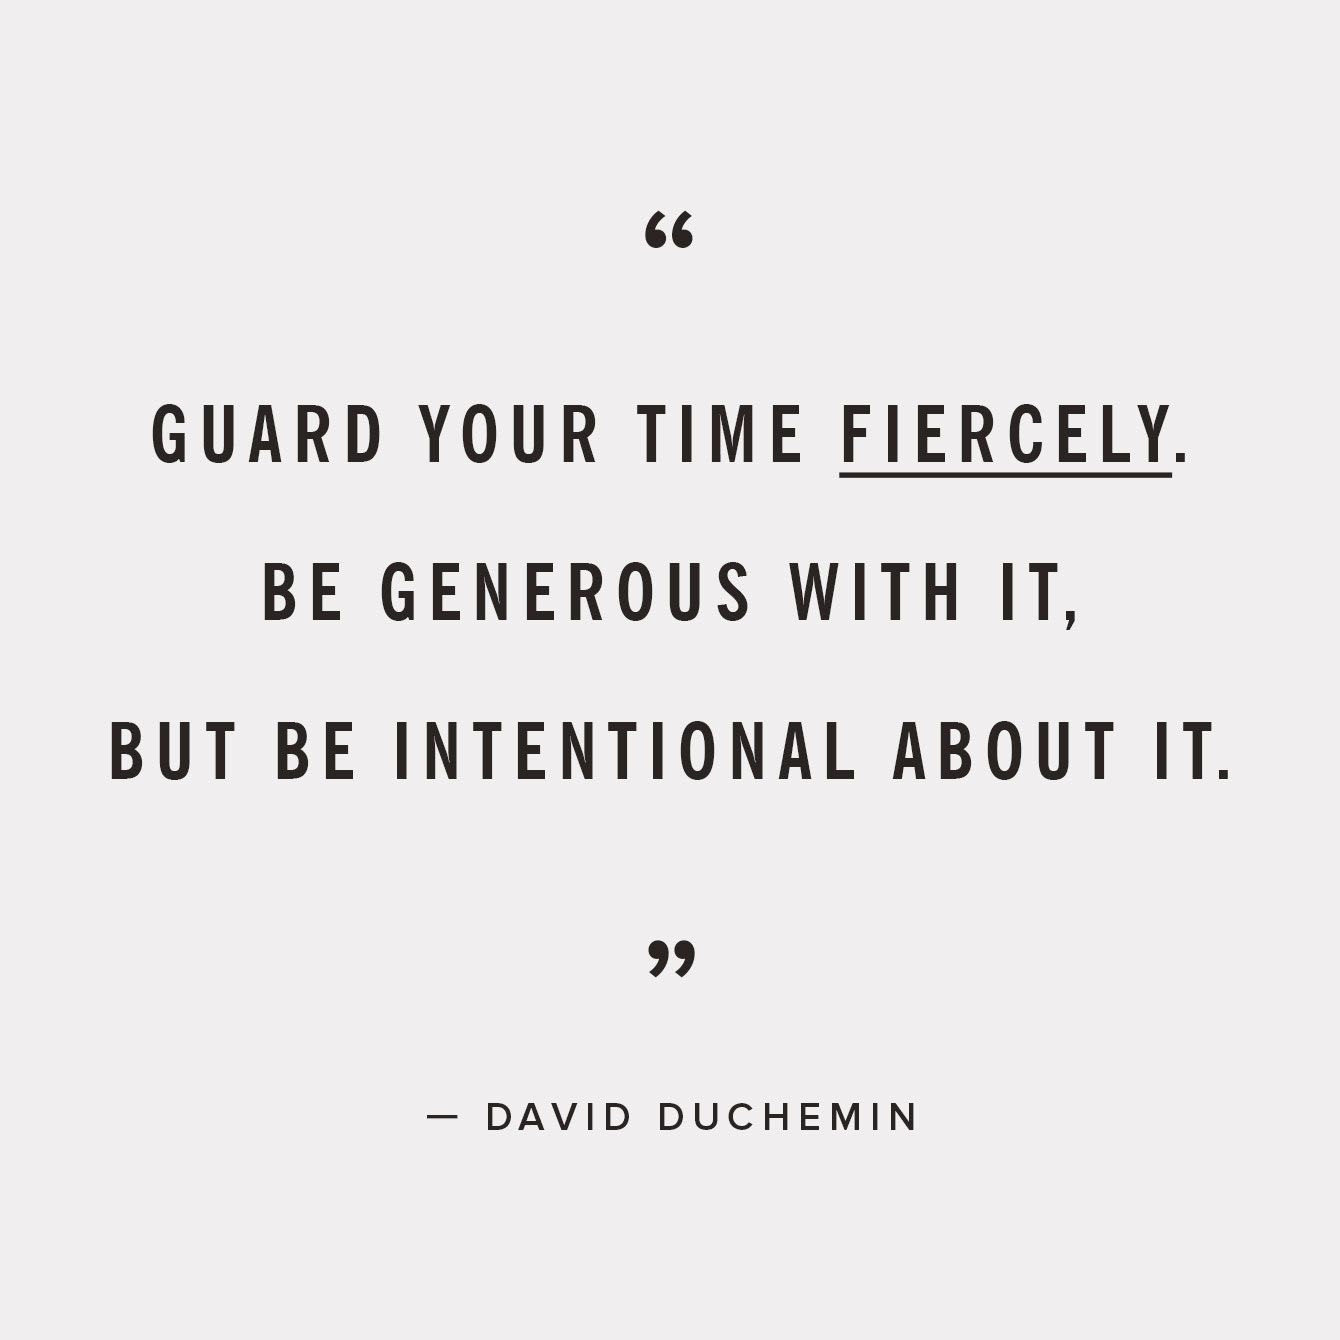 The Art of Exclusion | A guest post by David Duchemin | Inspirational quotes, Words of wisdom, Quotable quotes